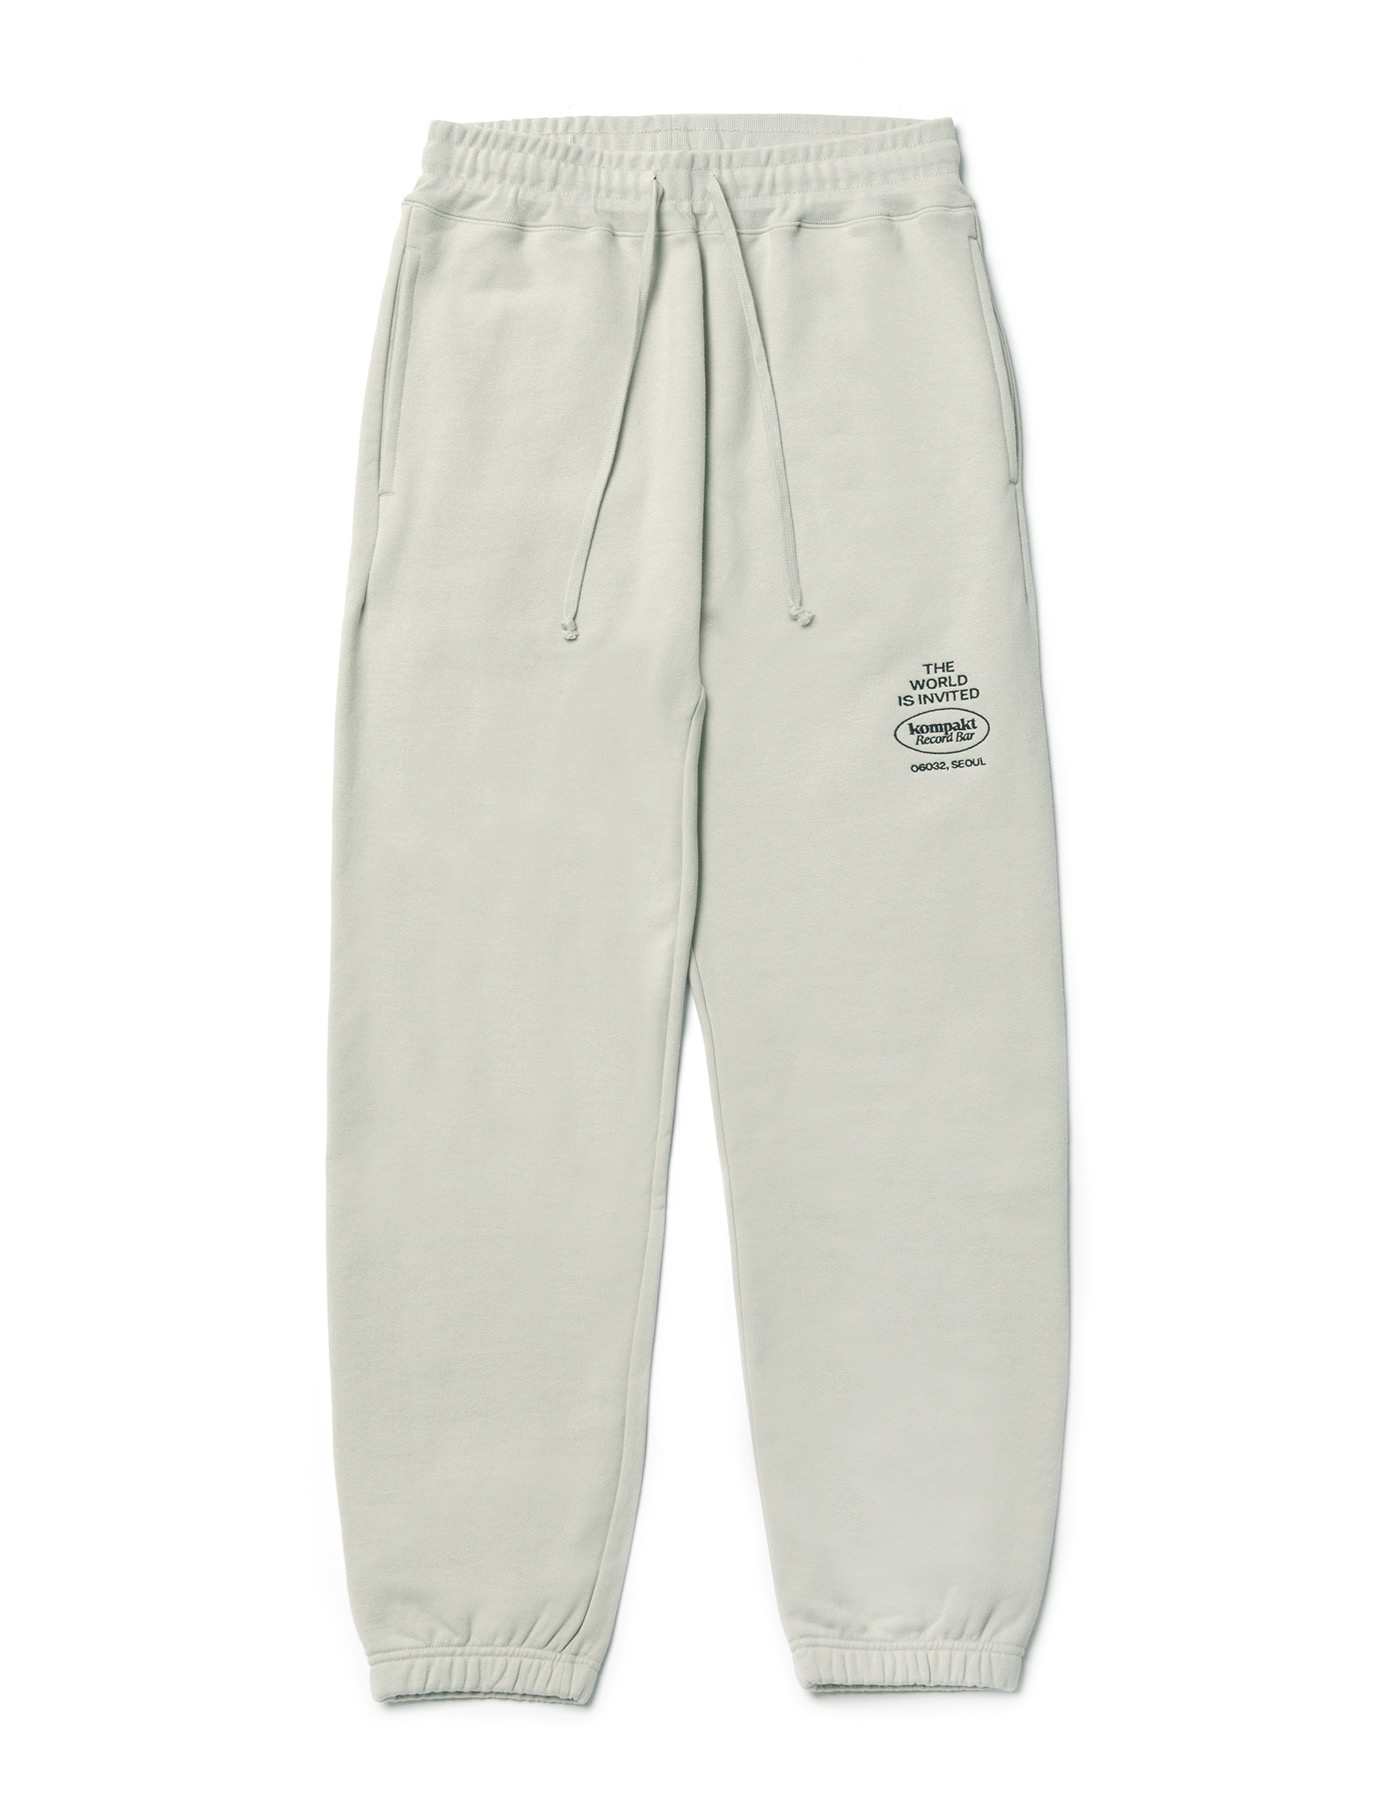 The World is Invited Embroidery Sweatpants - Beige